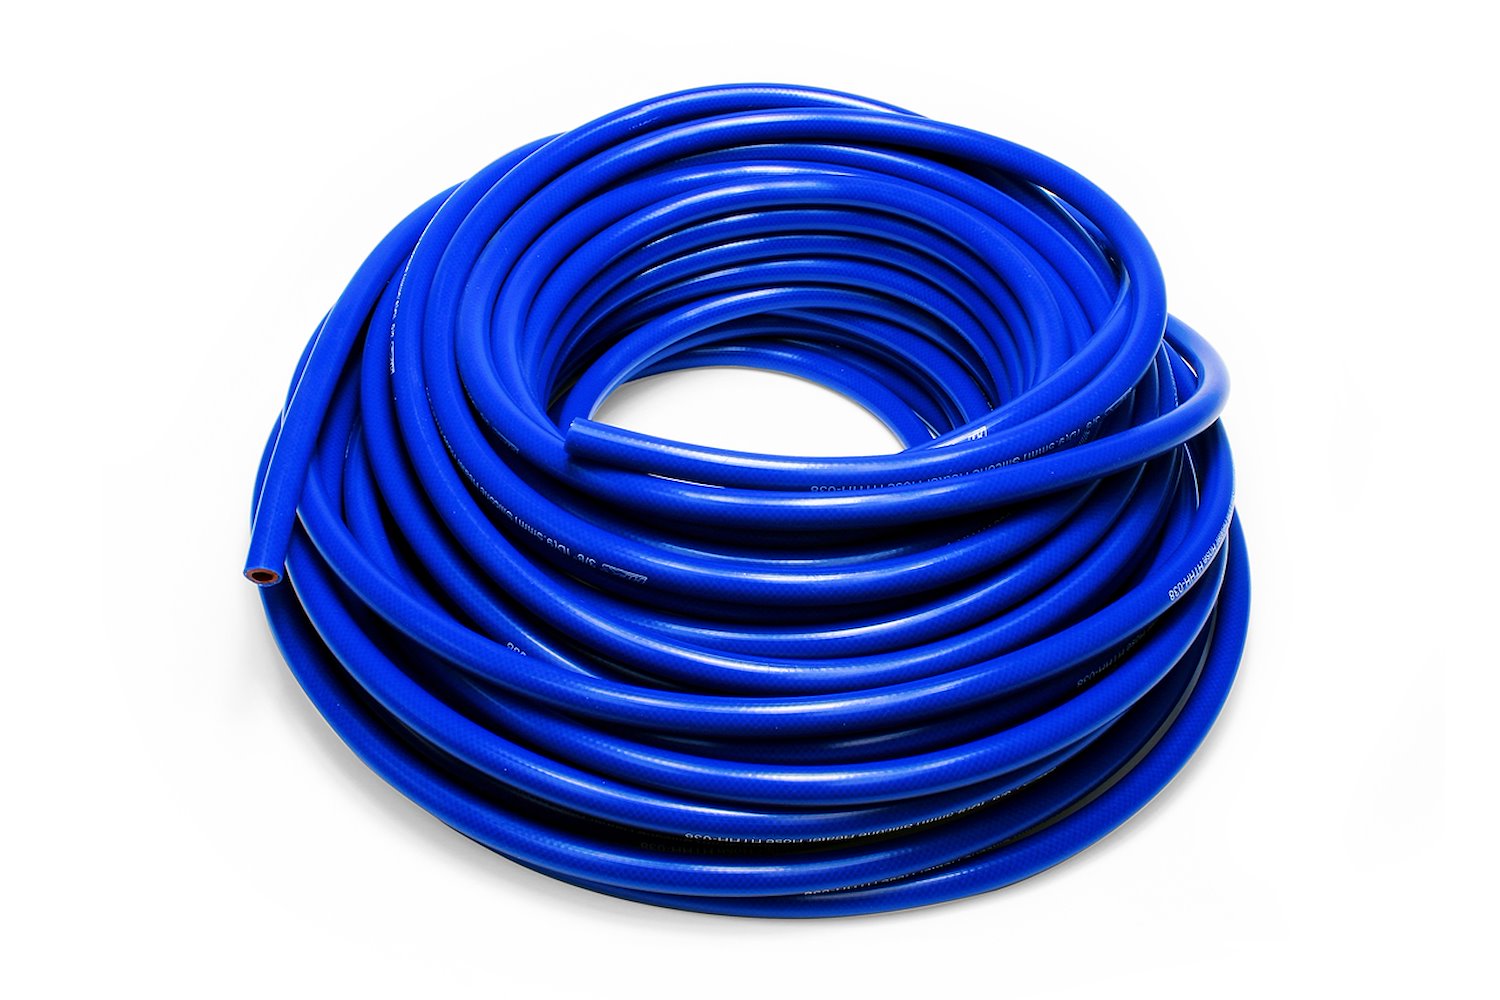 HTHH-062-BLUEx100 Silicone Heater Hose Tubing, High-Temp Reinforced, 5/8 in. ID, 100 ft. Roll, Blue